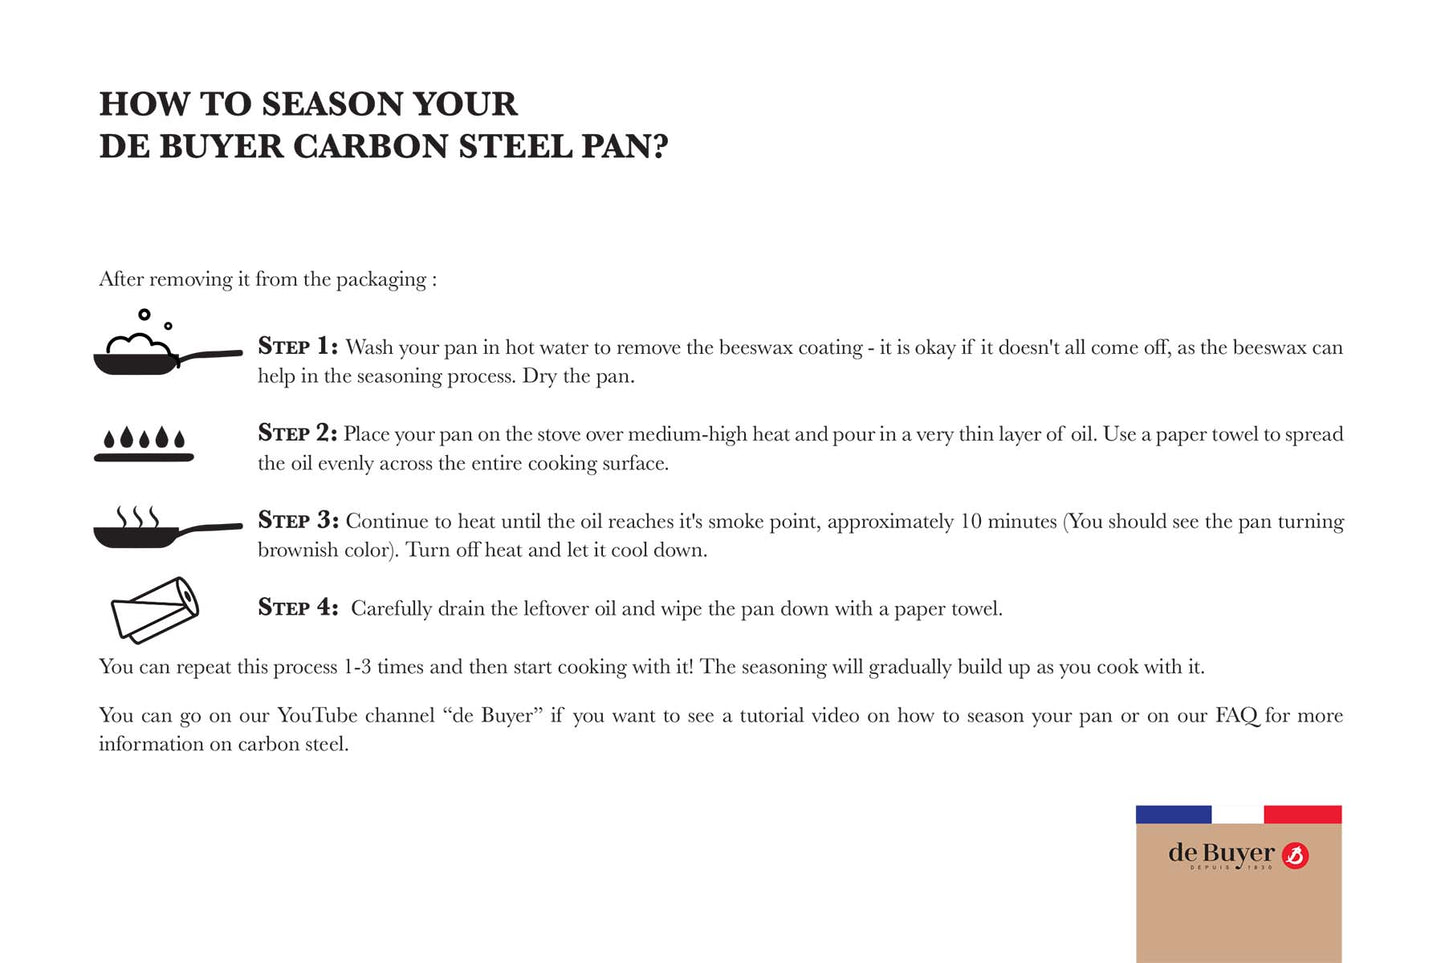 Carbon Steel Care & Tips